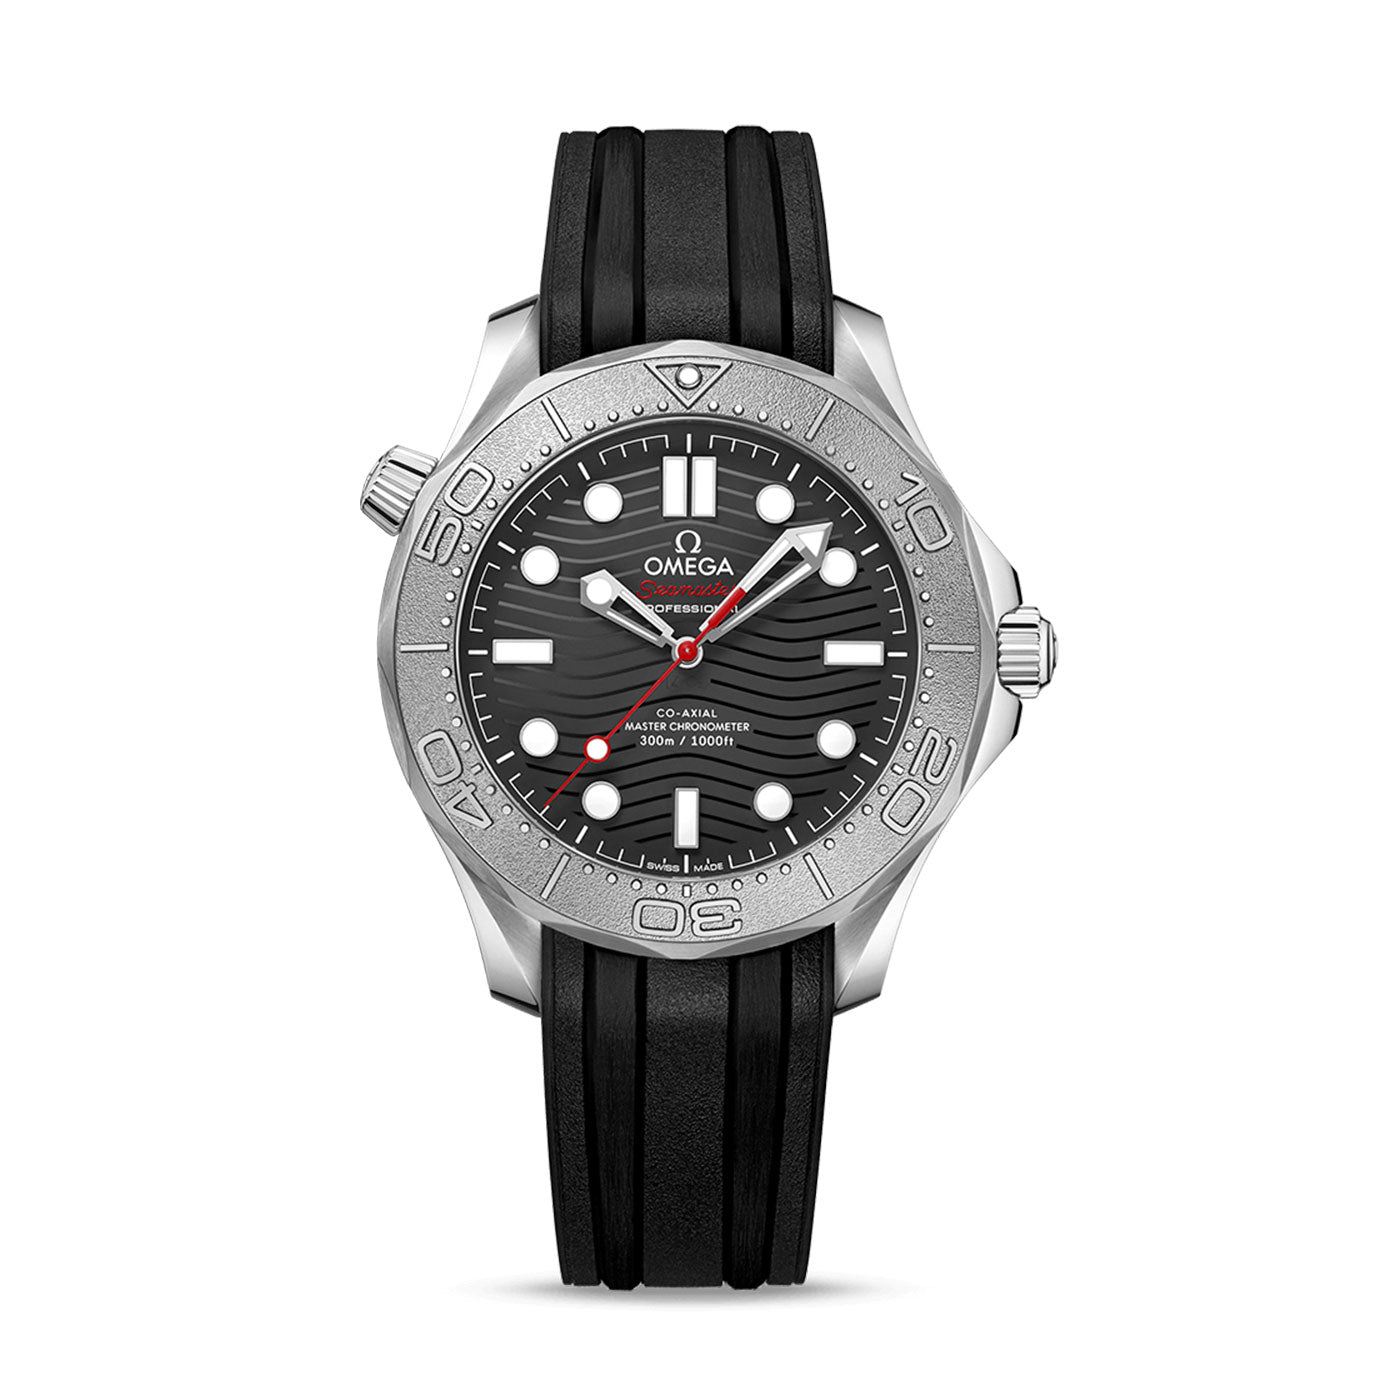 Omega Seamaster DIVER 300M CO‑AXIAL MASTER CHRONOMETER Ref# 210.32.42.20.01.002